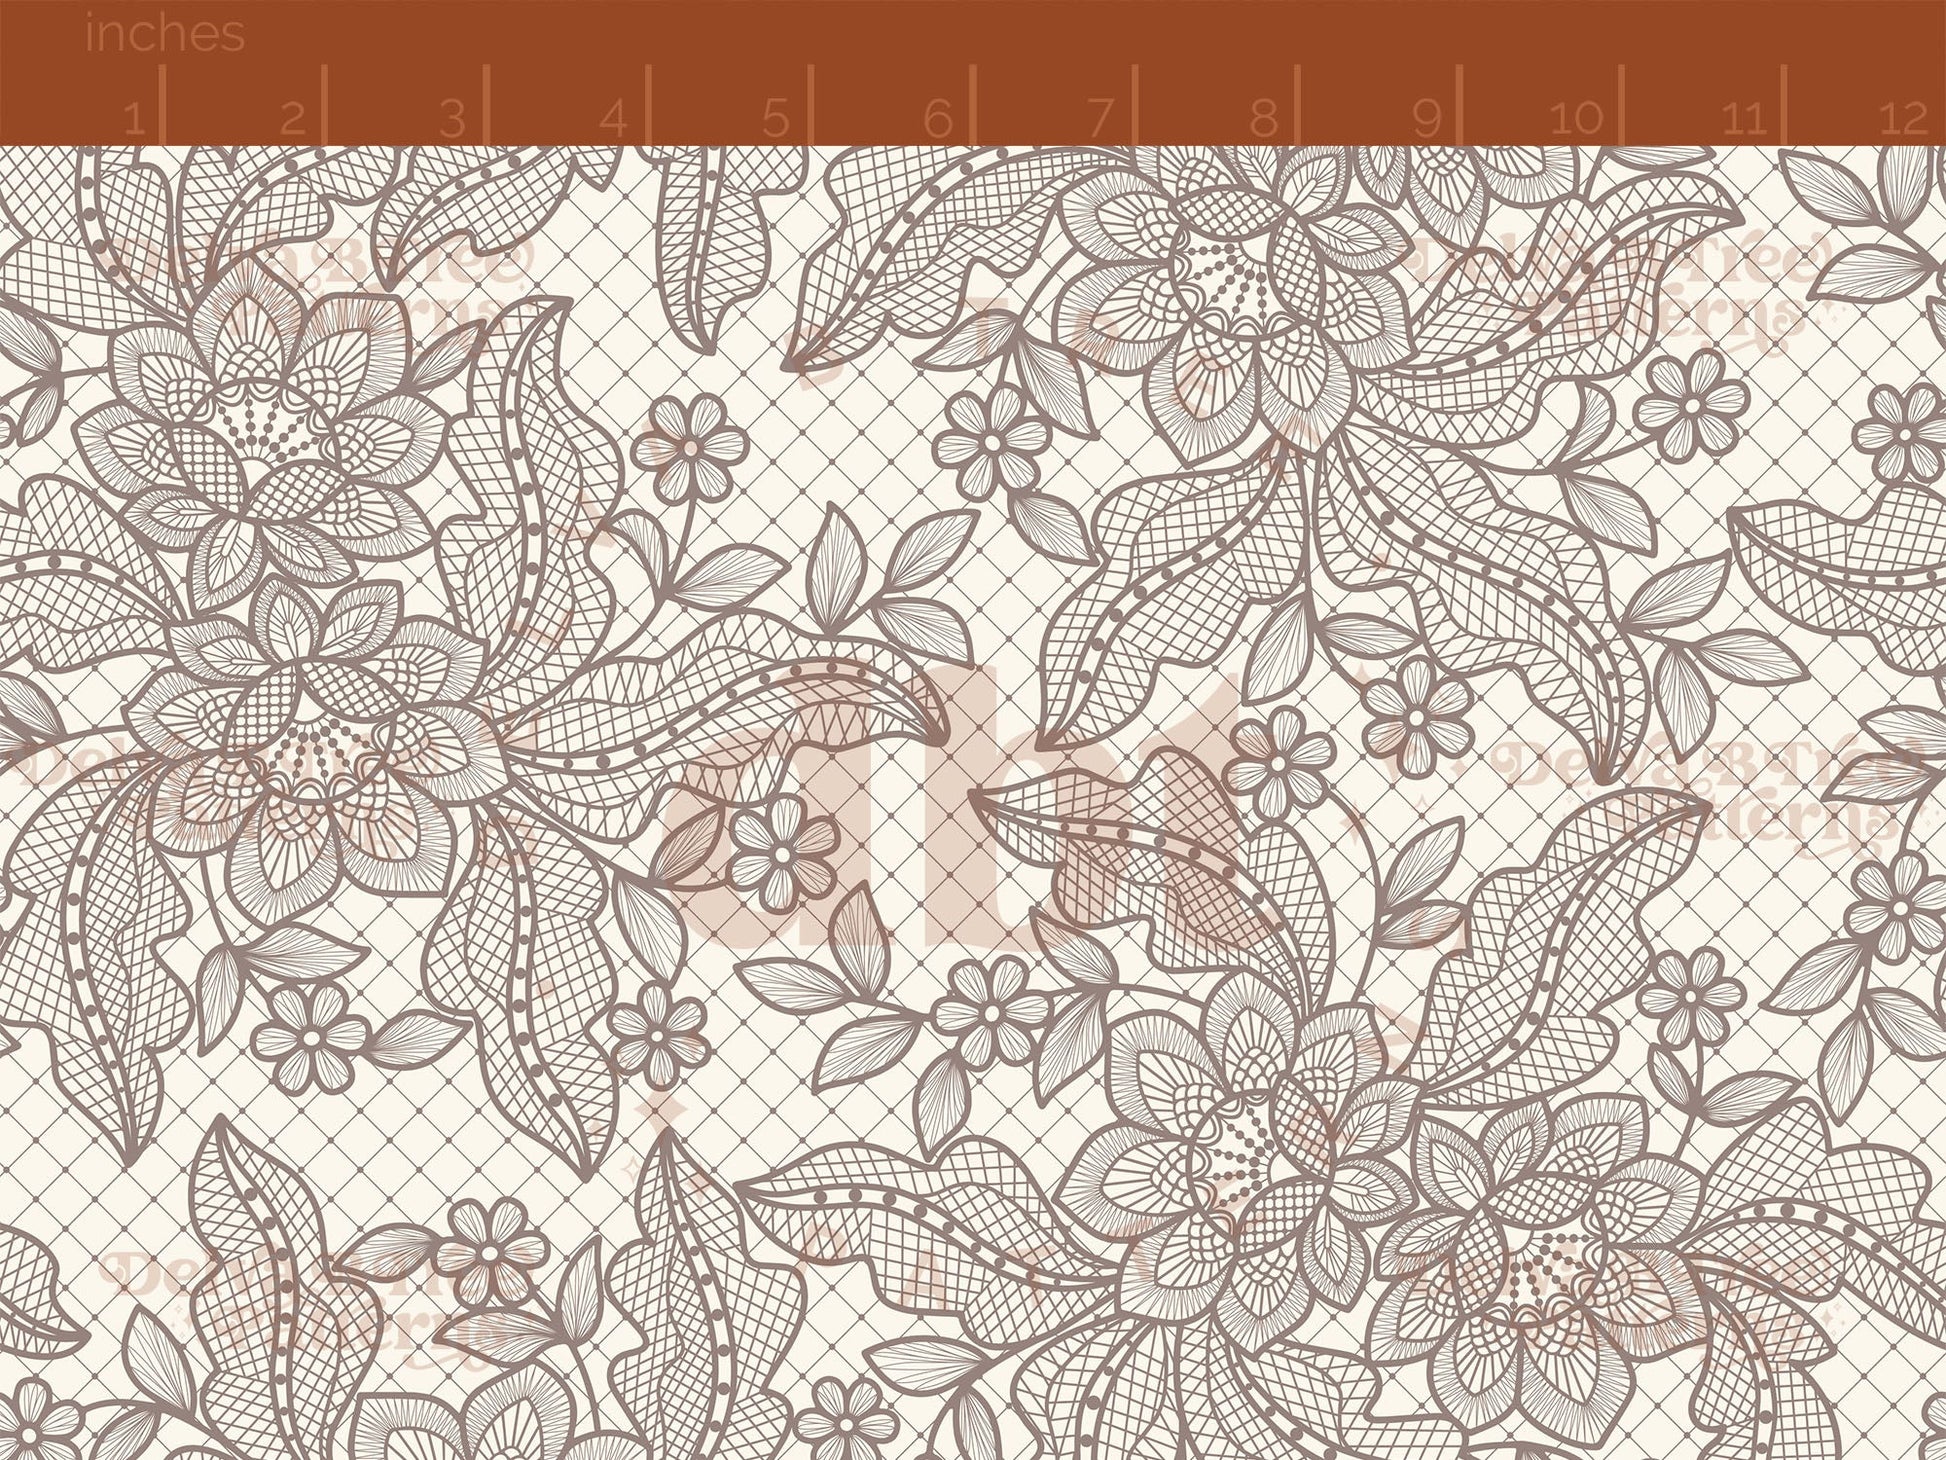 Taupe Cinereous flowers, leaves and faux lace netting on an off white / ivory / cream background seamless pattern scale digital file for small shops that make handmade products in small batches.